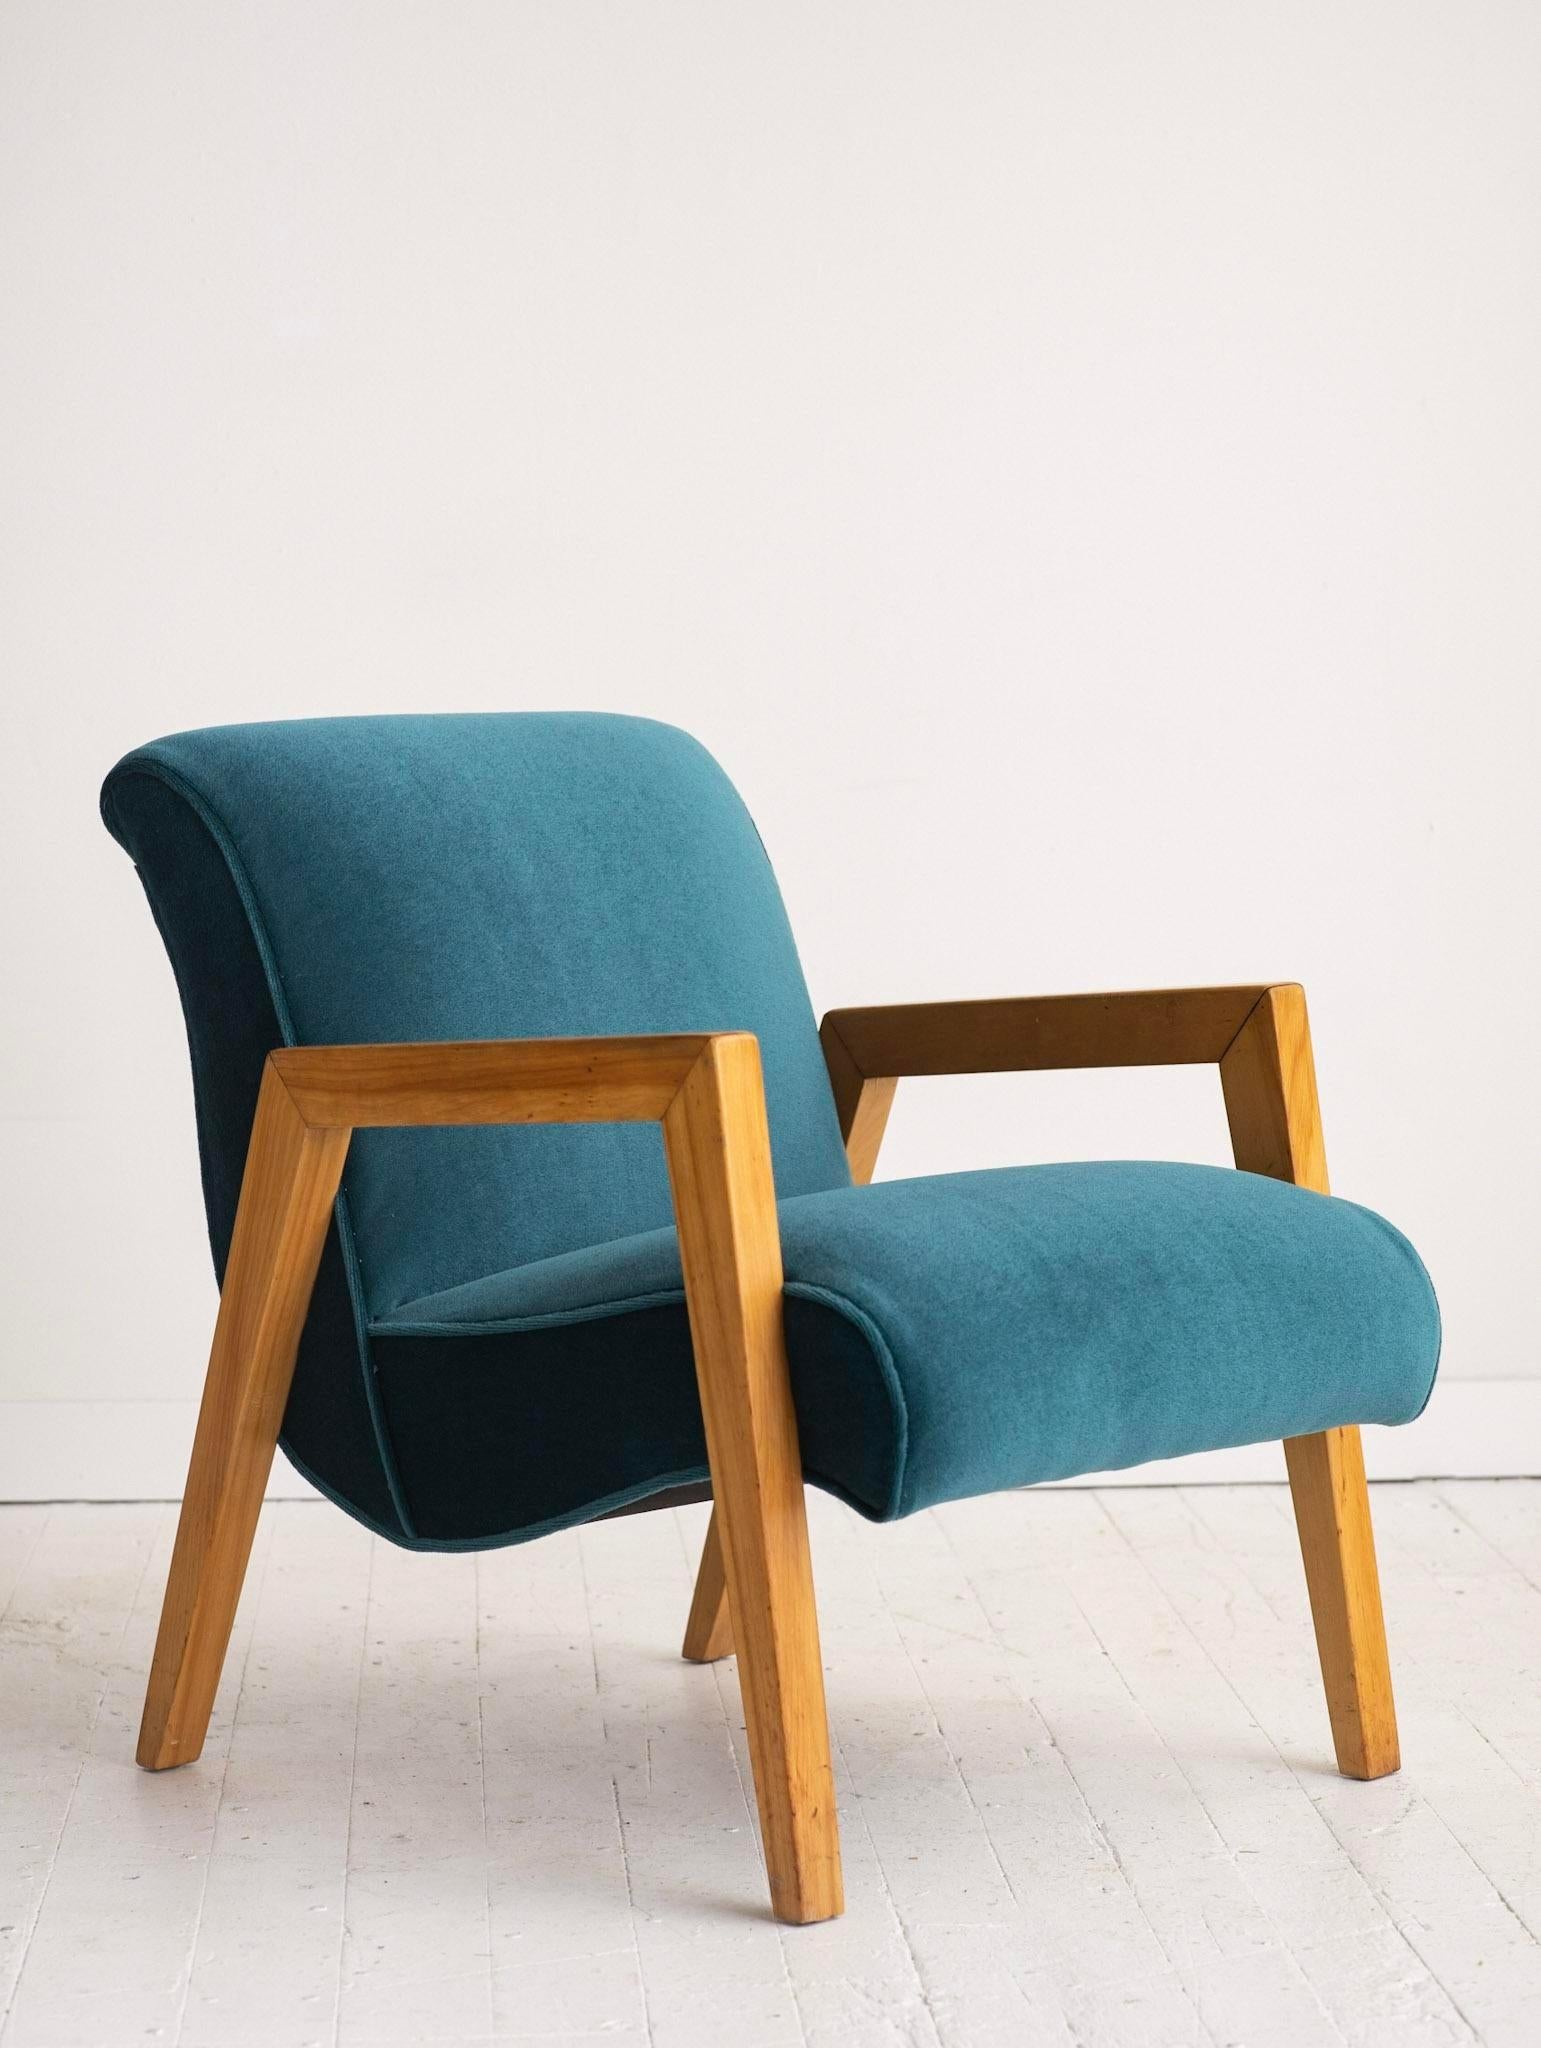 Mid-Century Modern Scoop Chair by Leslie Diamond for Conant Ball in Teal Mohair